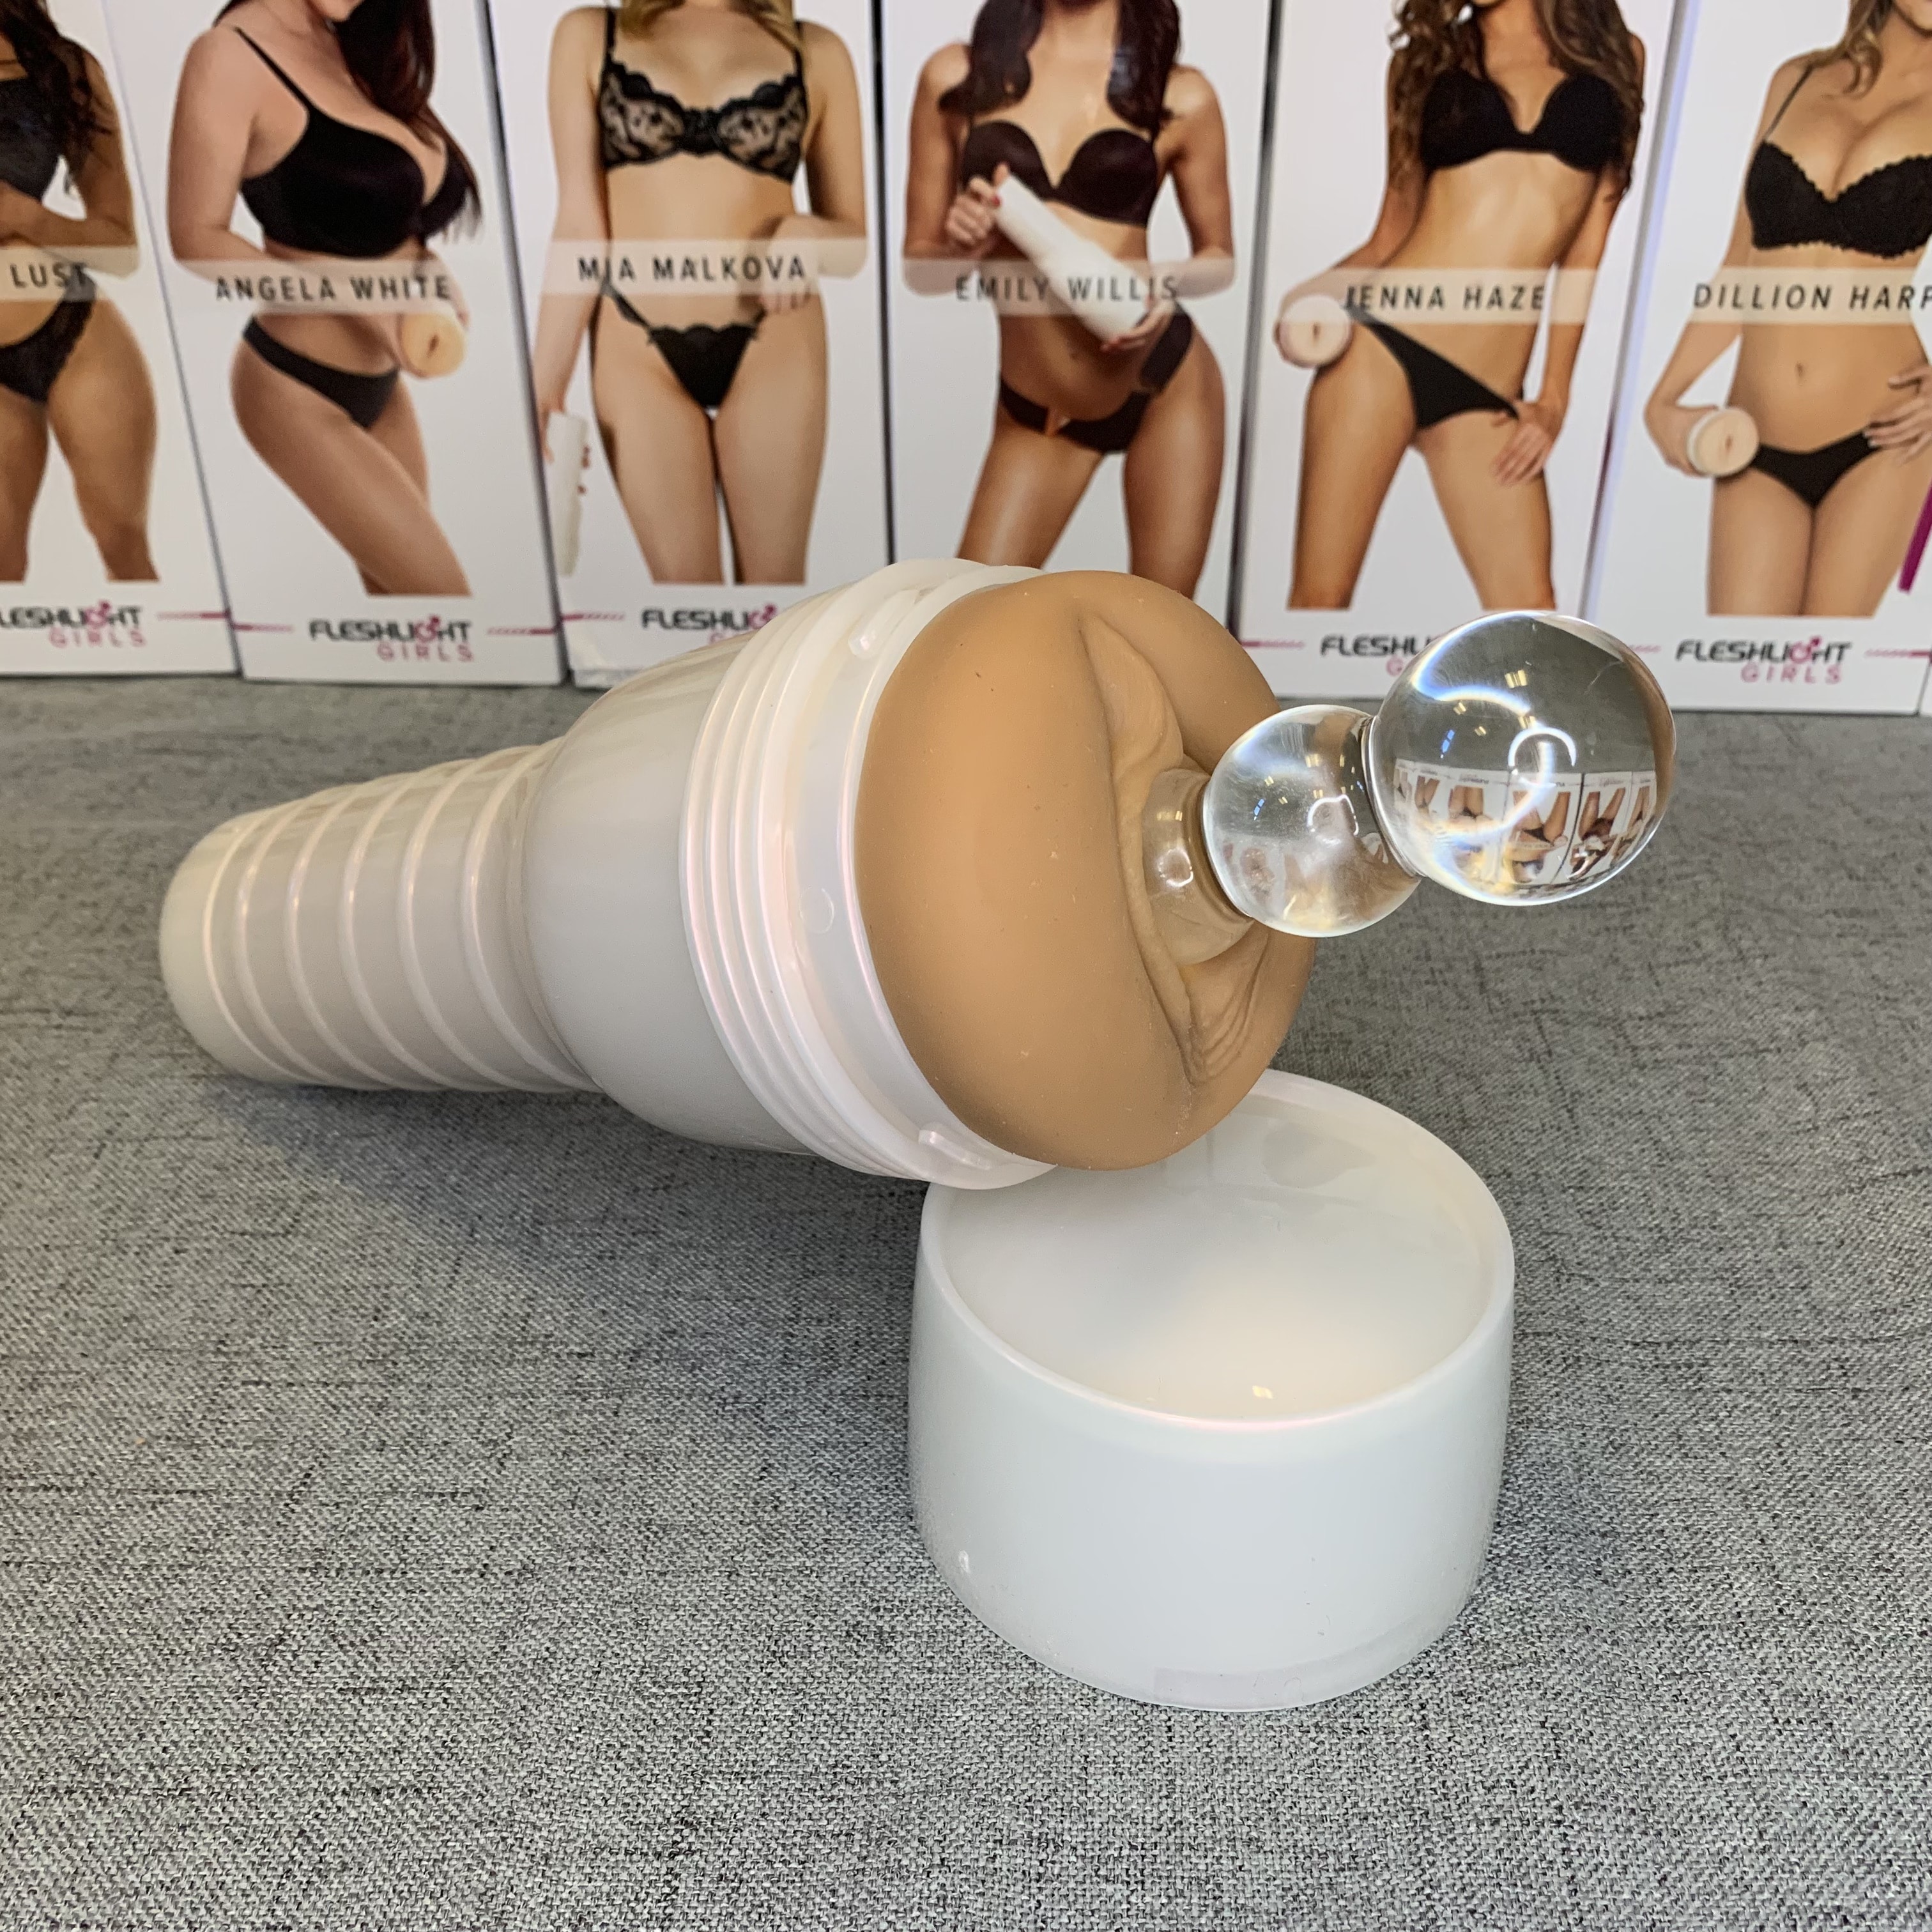 Janice Griffith Fleshlight Eden Was the Janice Griffith Fleshlight Eden easy to use?